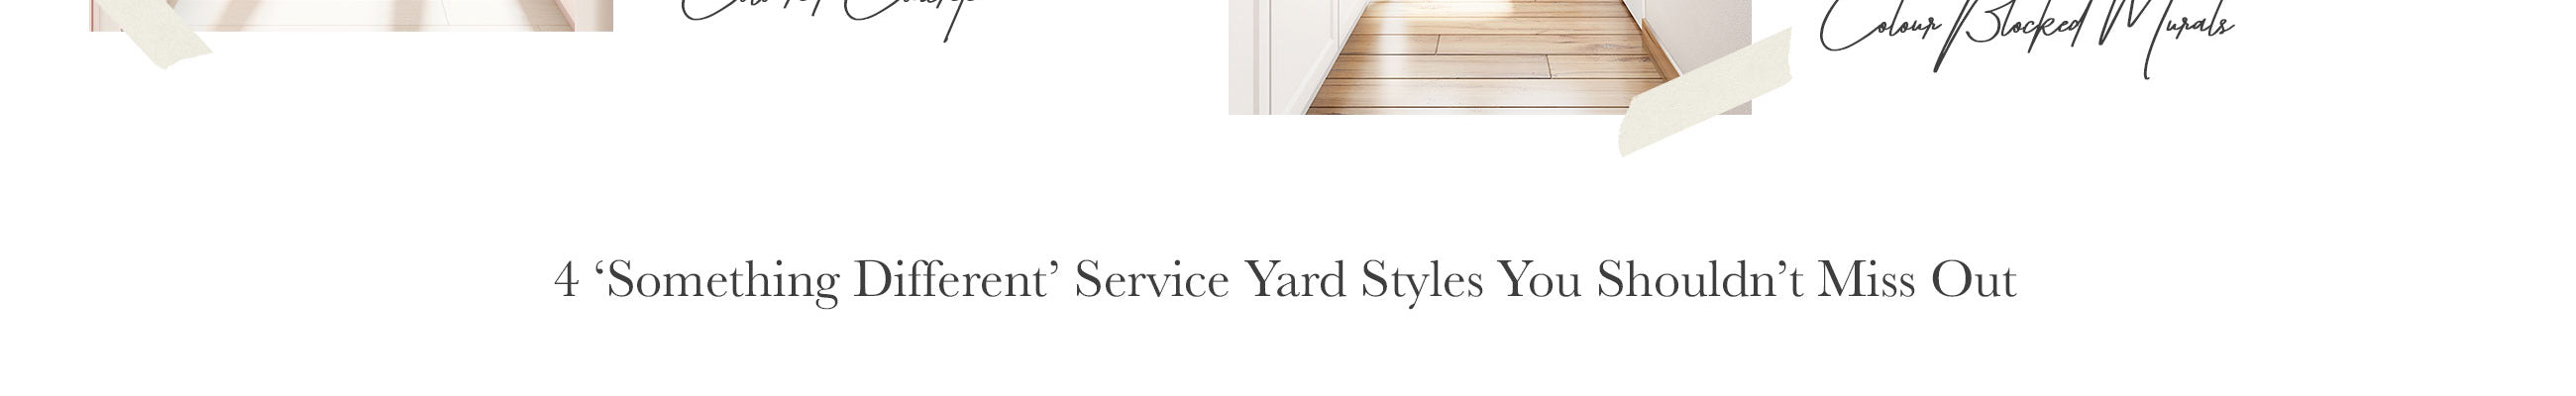 4 ‘Something Different’ Service Yard Styles You Shouldn’t Miss Out